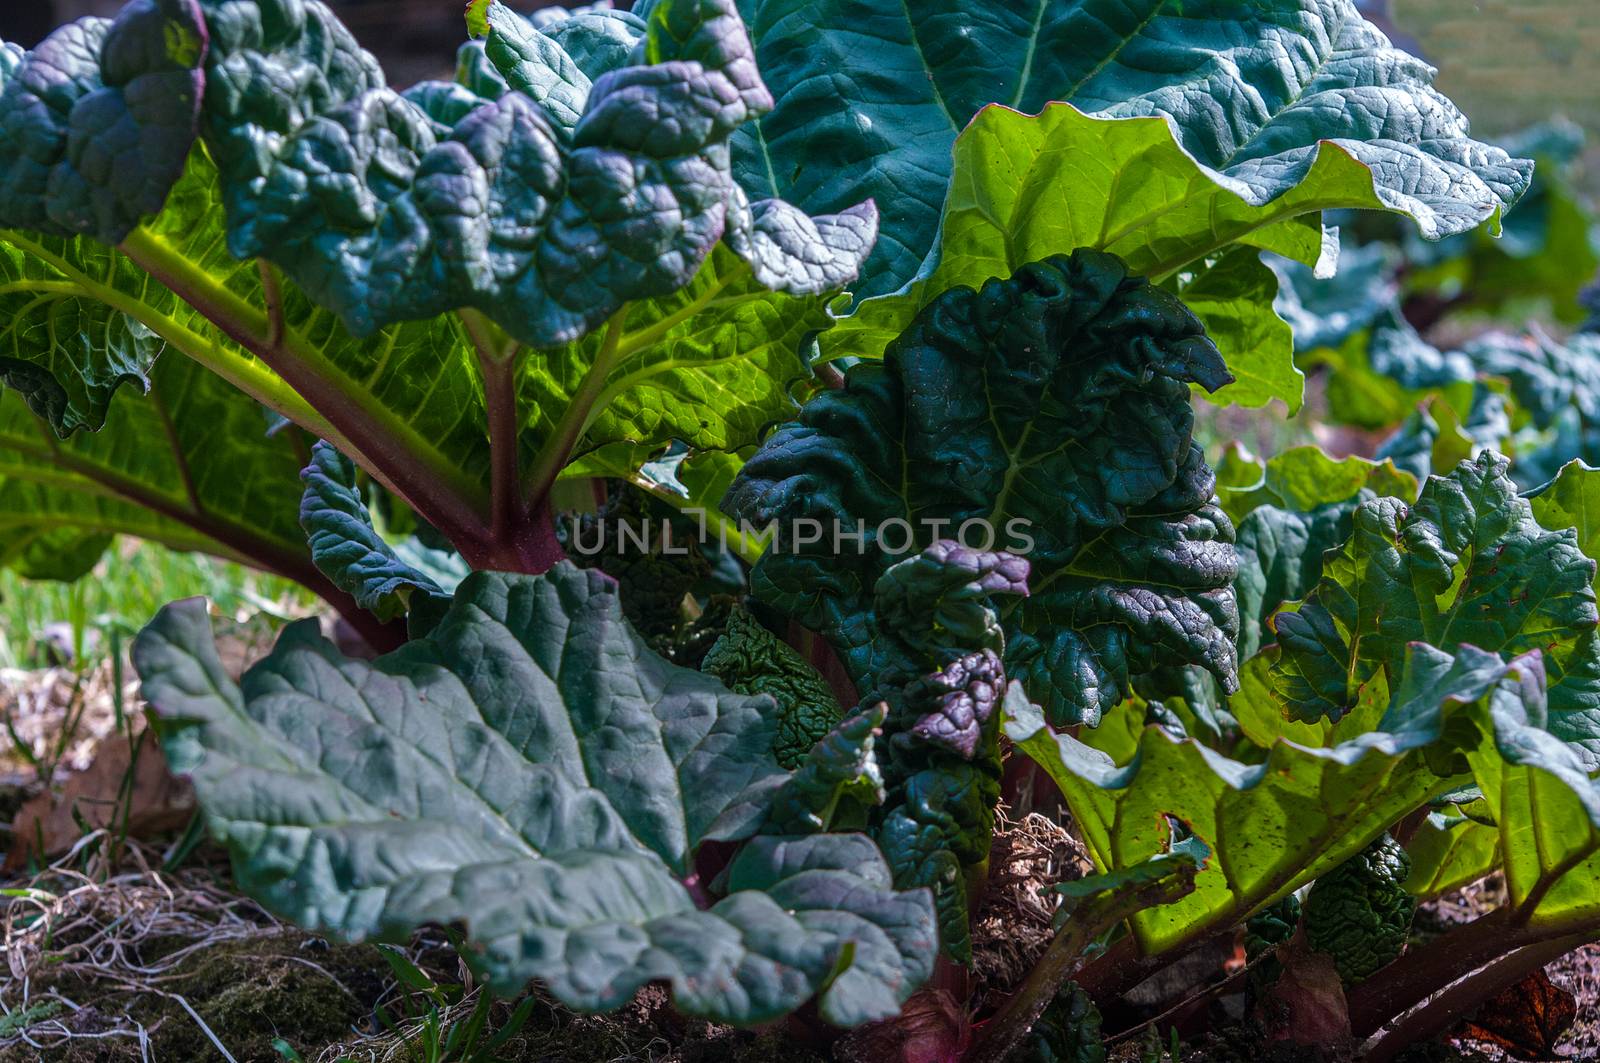  Rhubarb plant in the spring